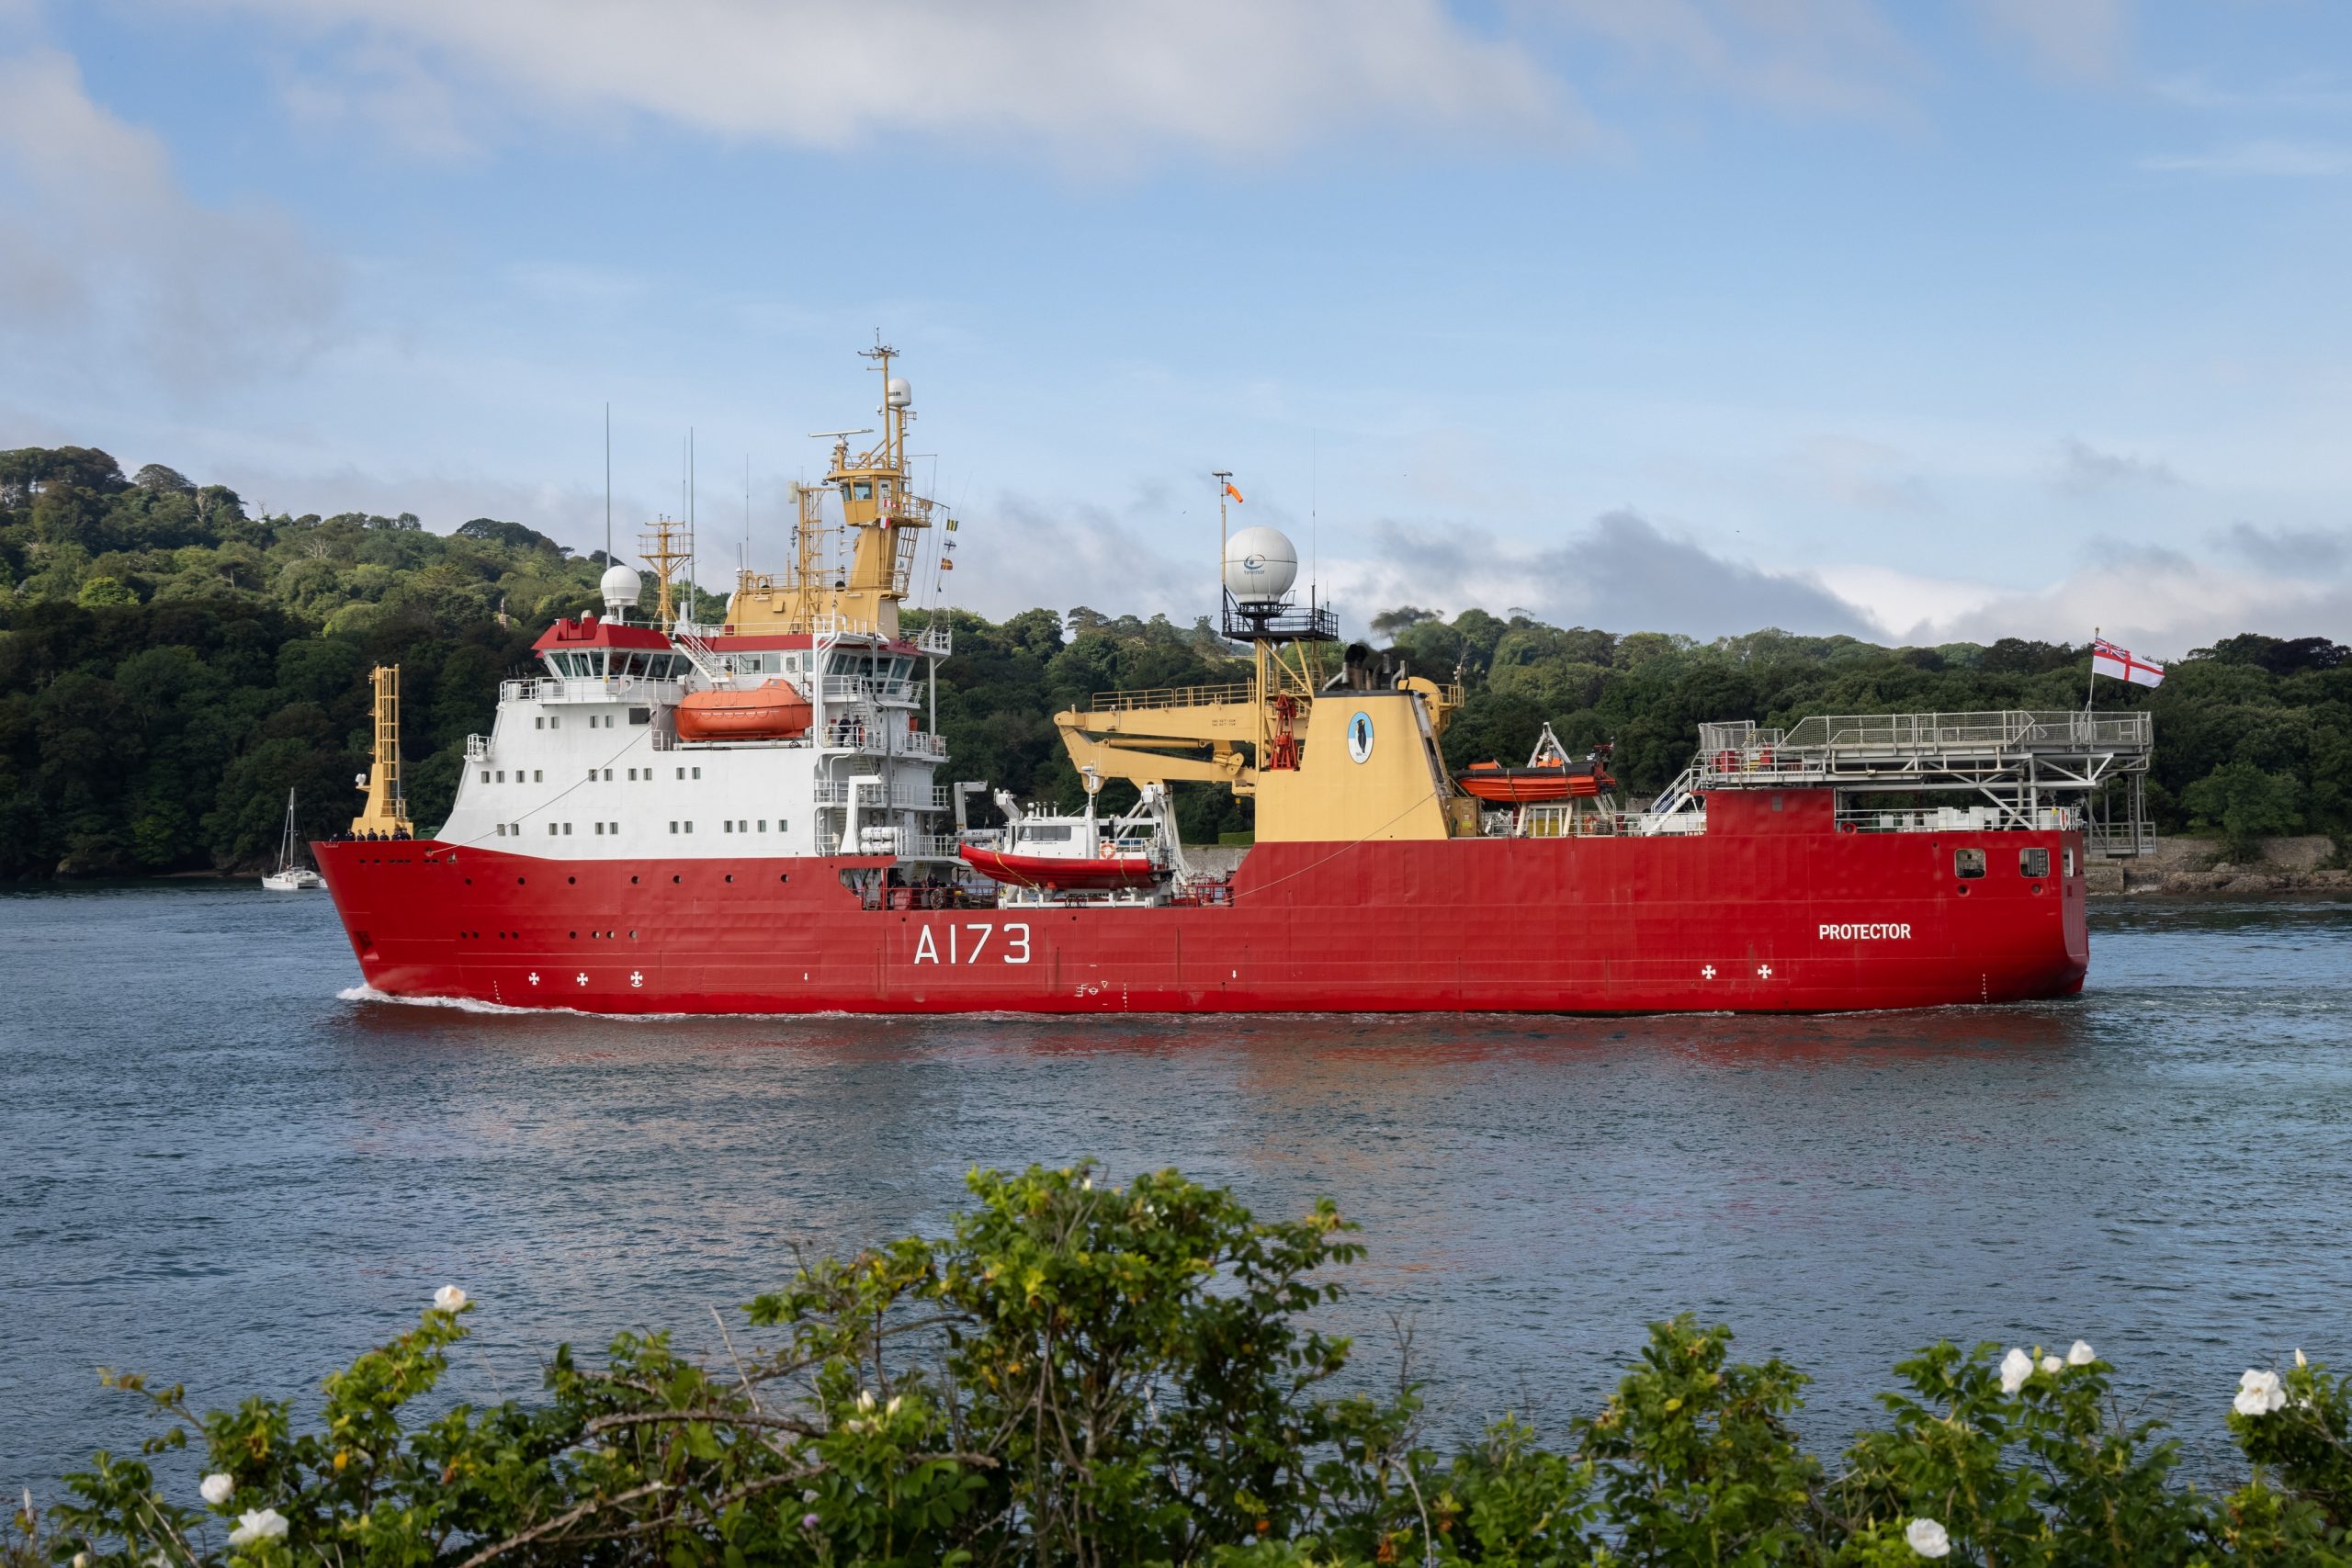 HMS Protector Sails For ‘New Adventures’ In Antarctica